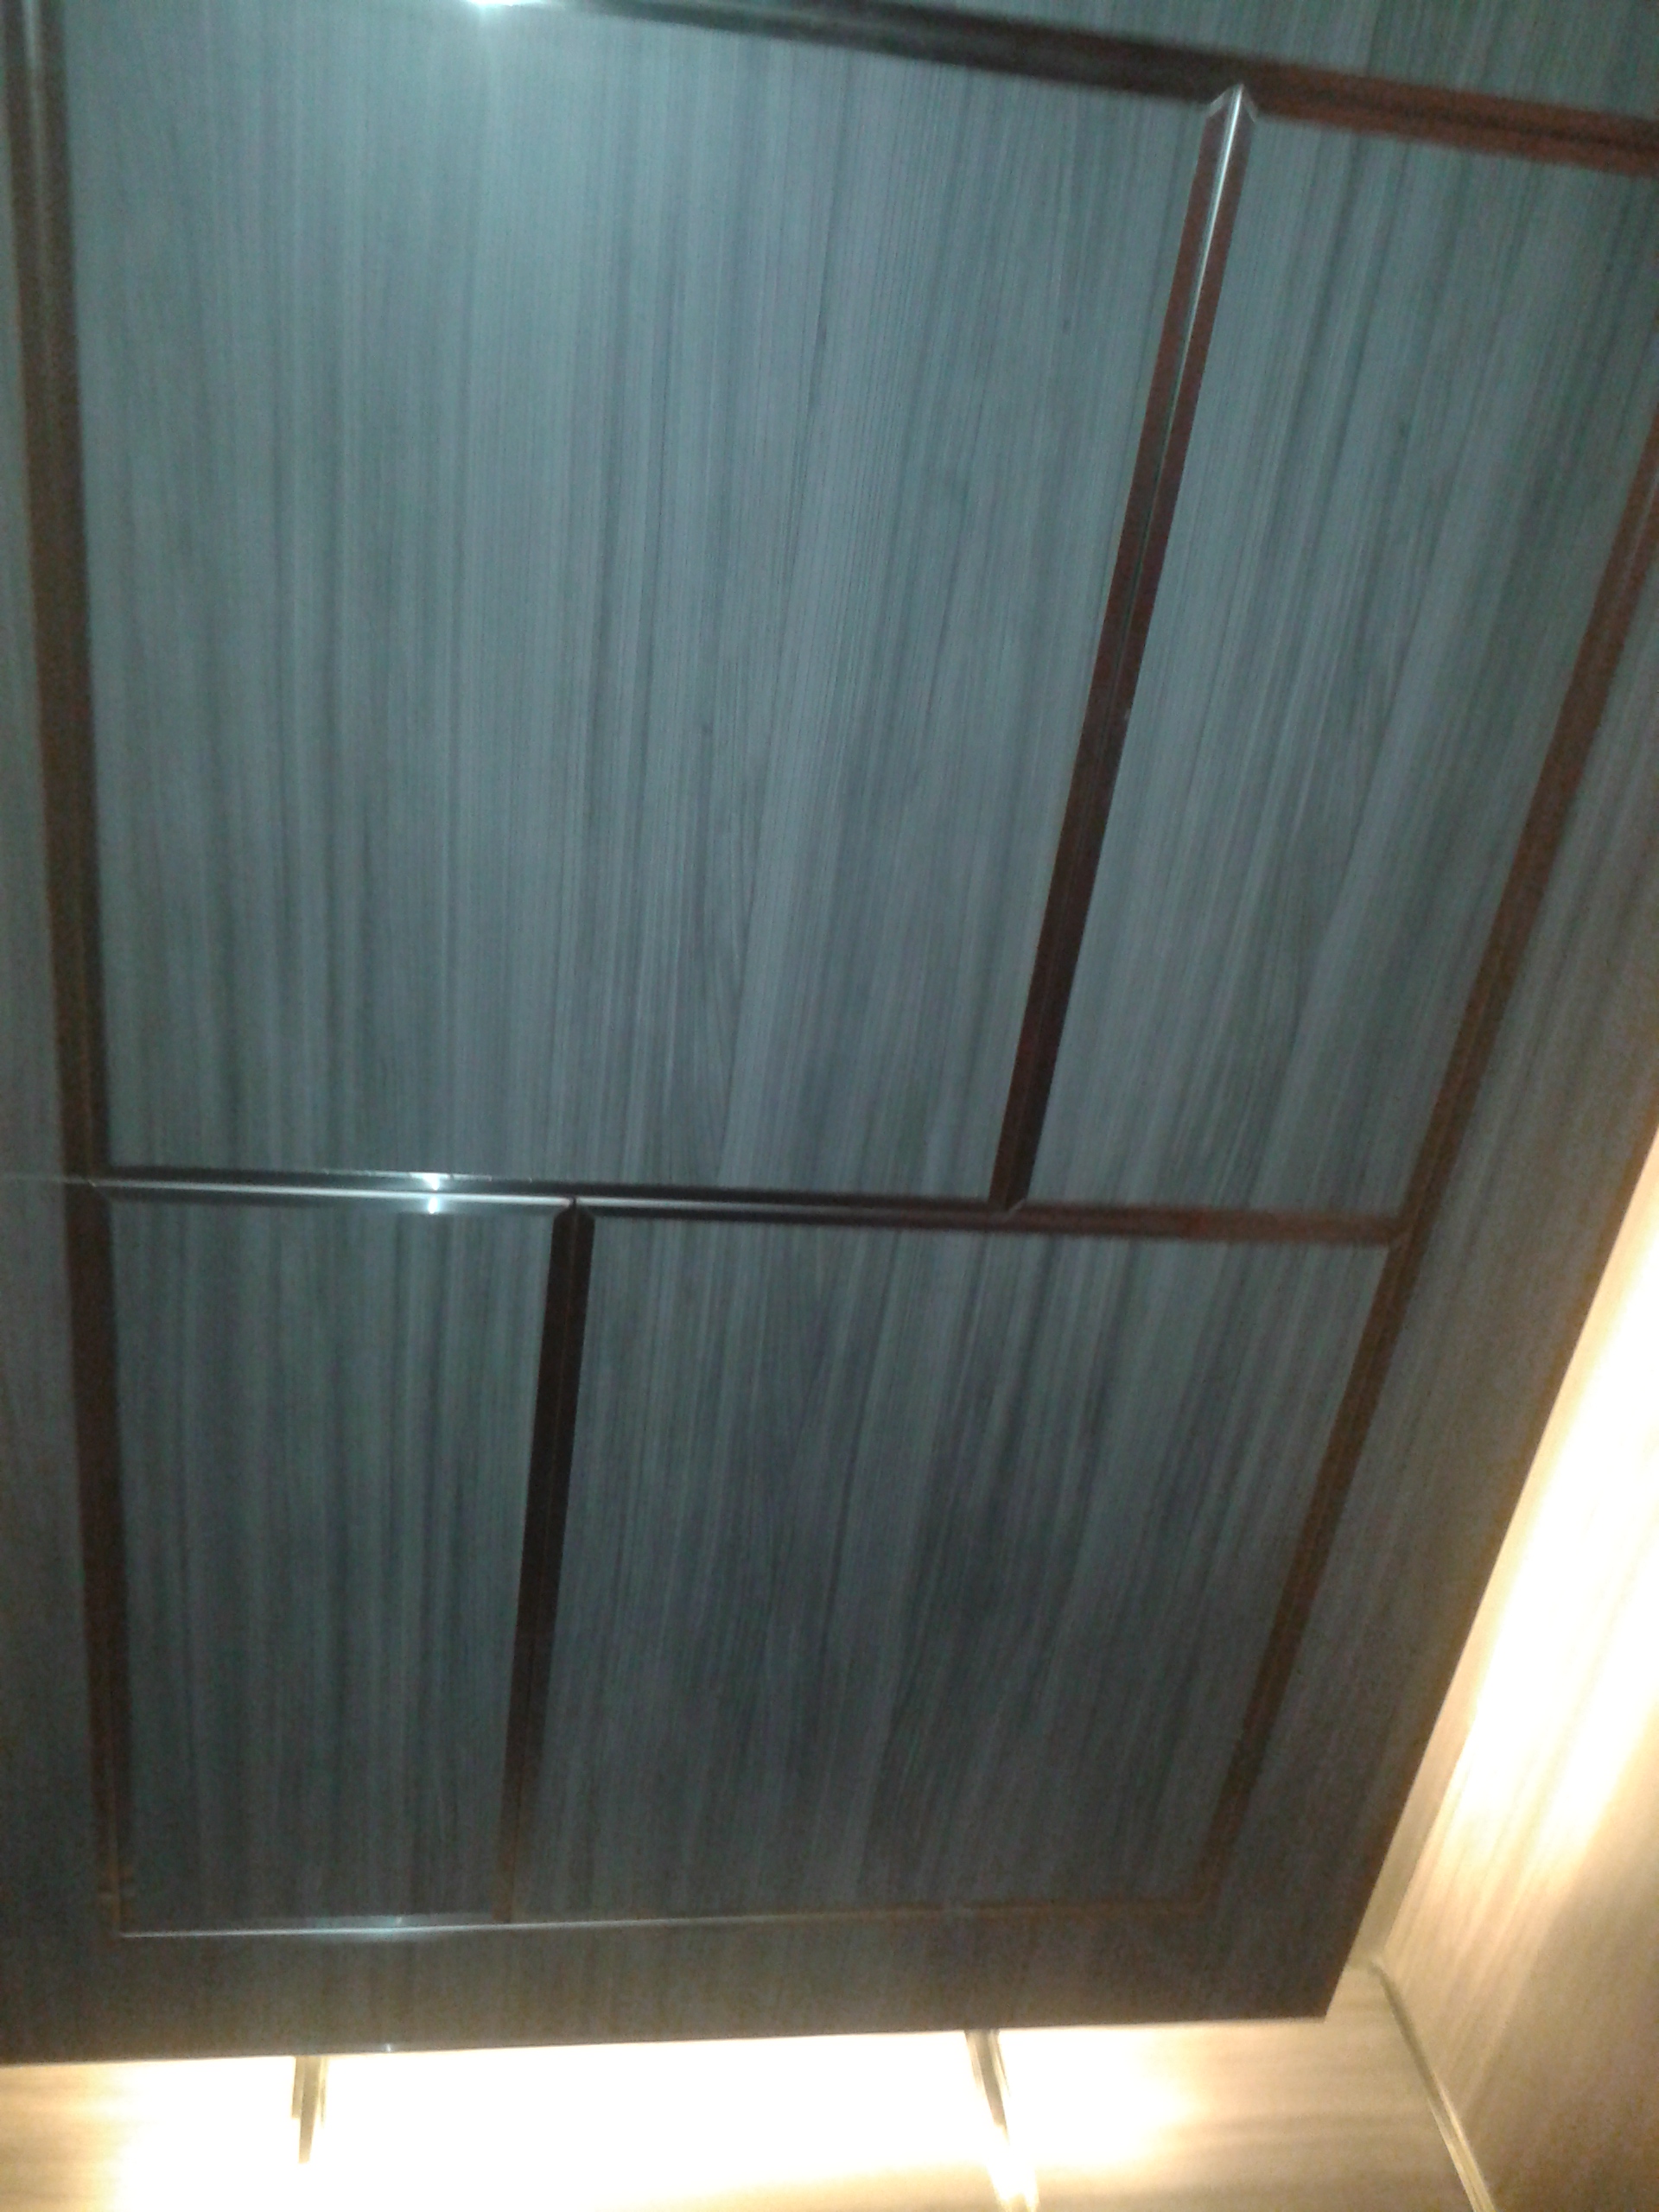 Intricate Ceiling Design w/ Stainless Steel Binder